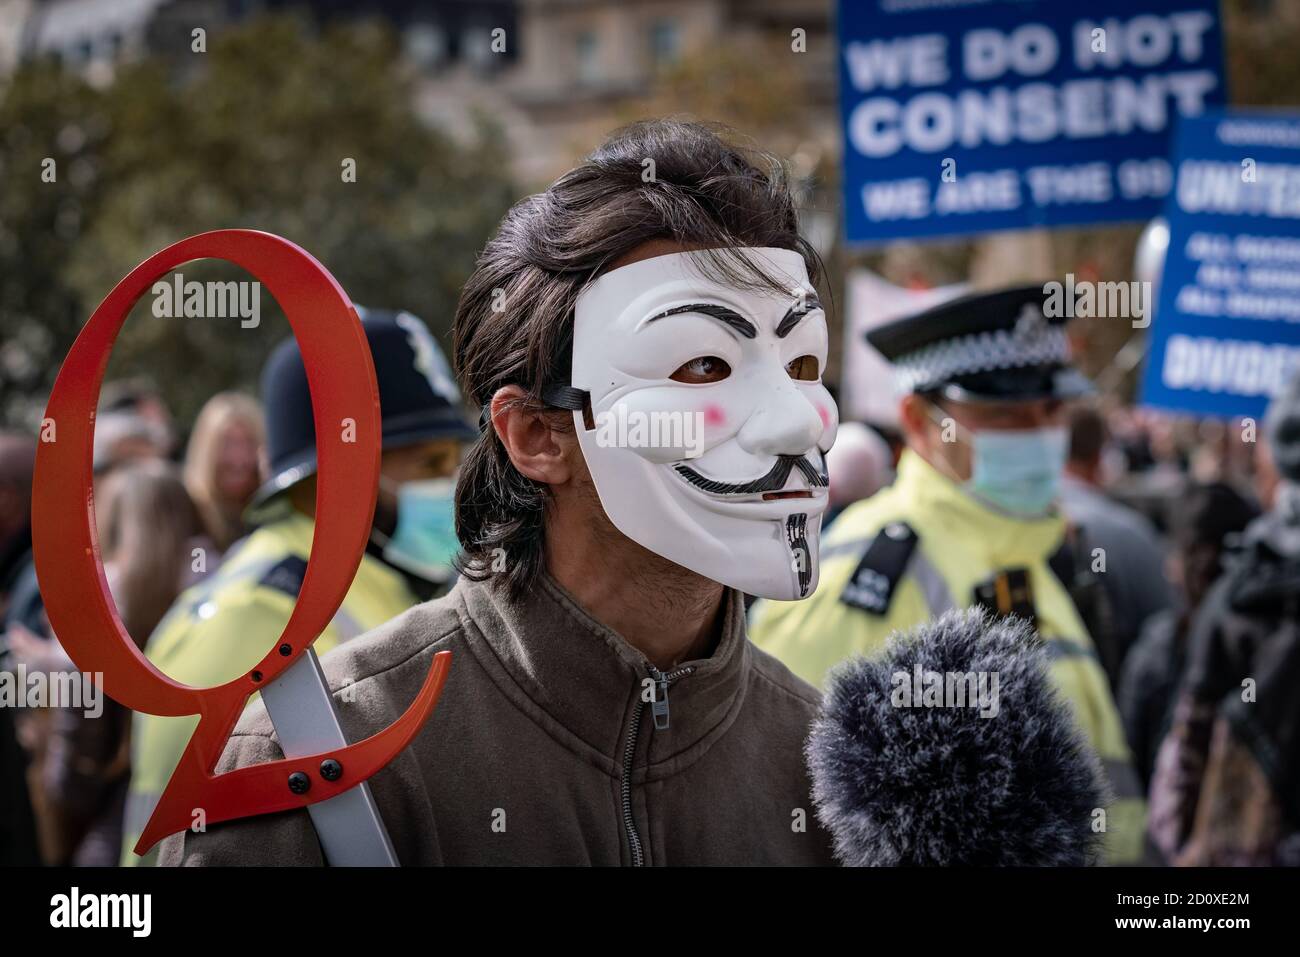 Thousands of maskless demonstrators ignore social distancing for ‘We Do Not Consent’ anti-lockdown protest and rally in Trafalgar Square, London, UK. Stock Photo